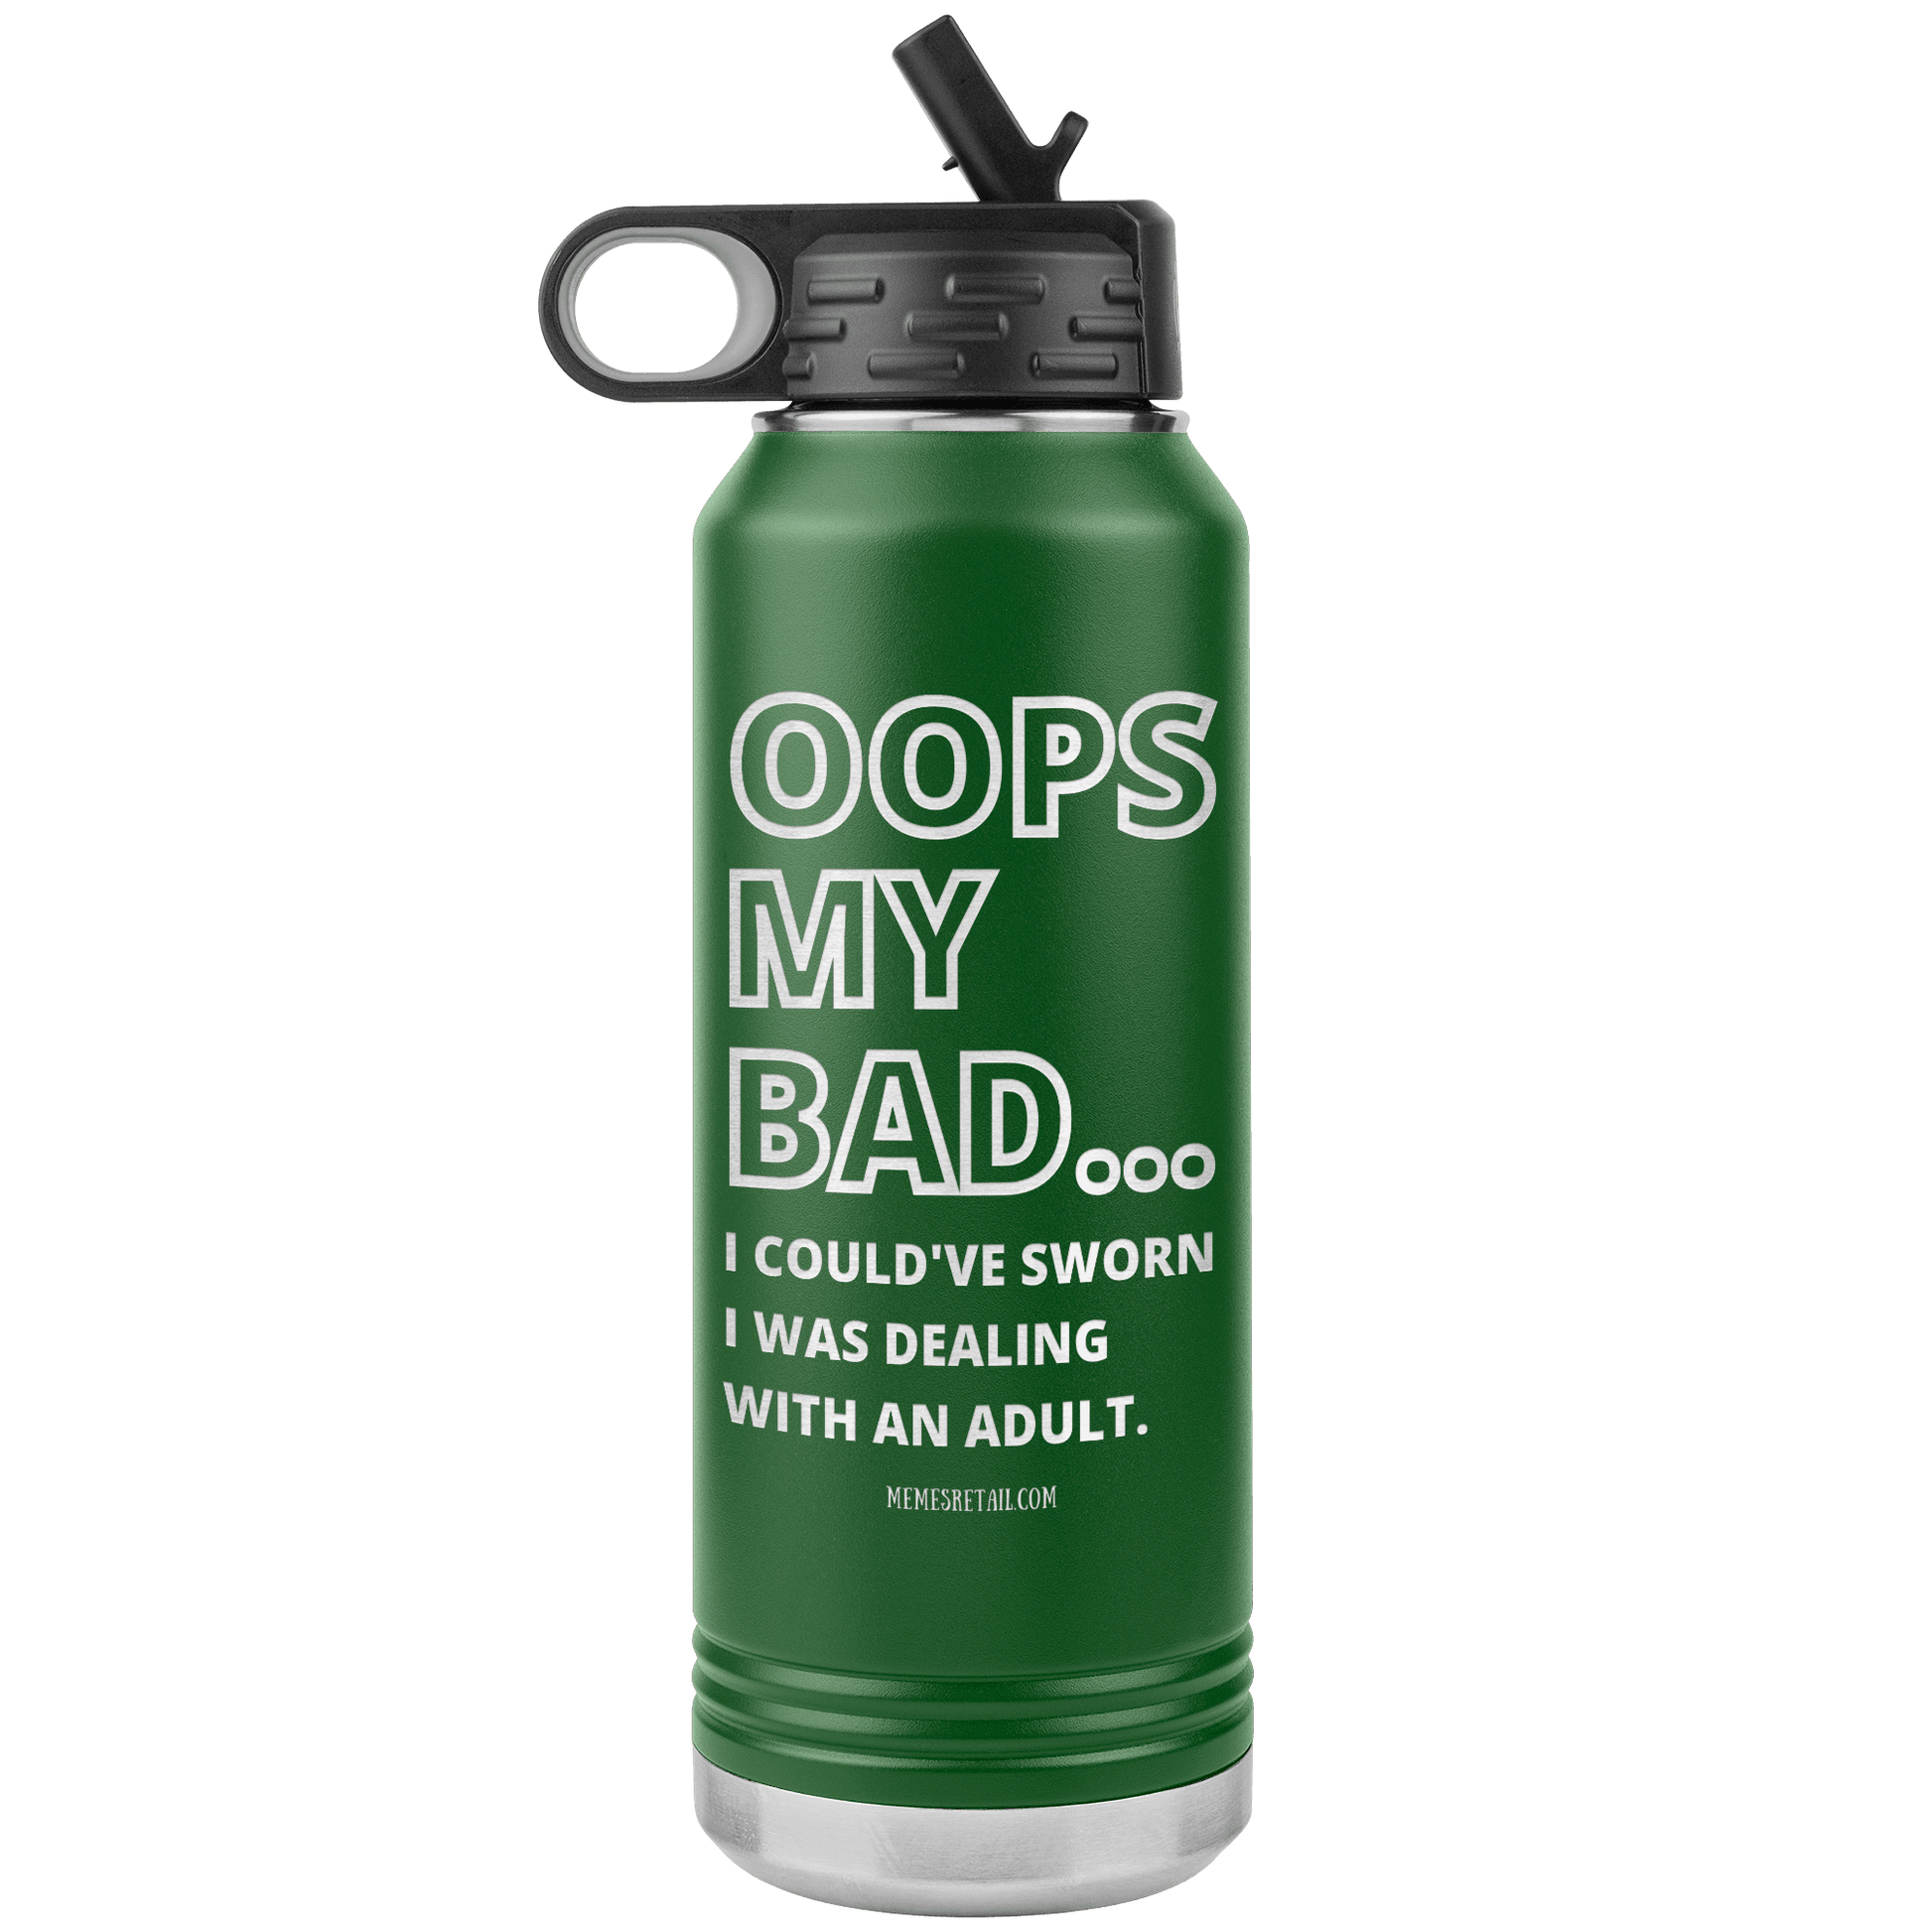 OOPS My bad...i could've sworn i was talking with an adult 32 oz Water Tumbler, Green - MemesRetail.com